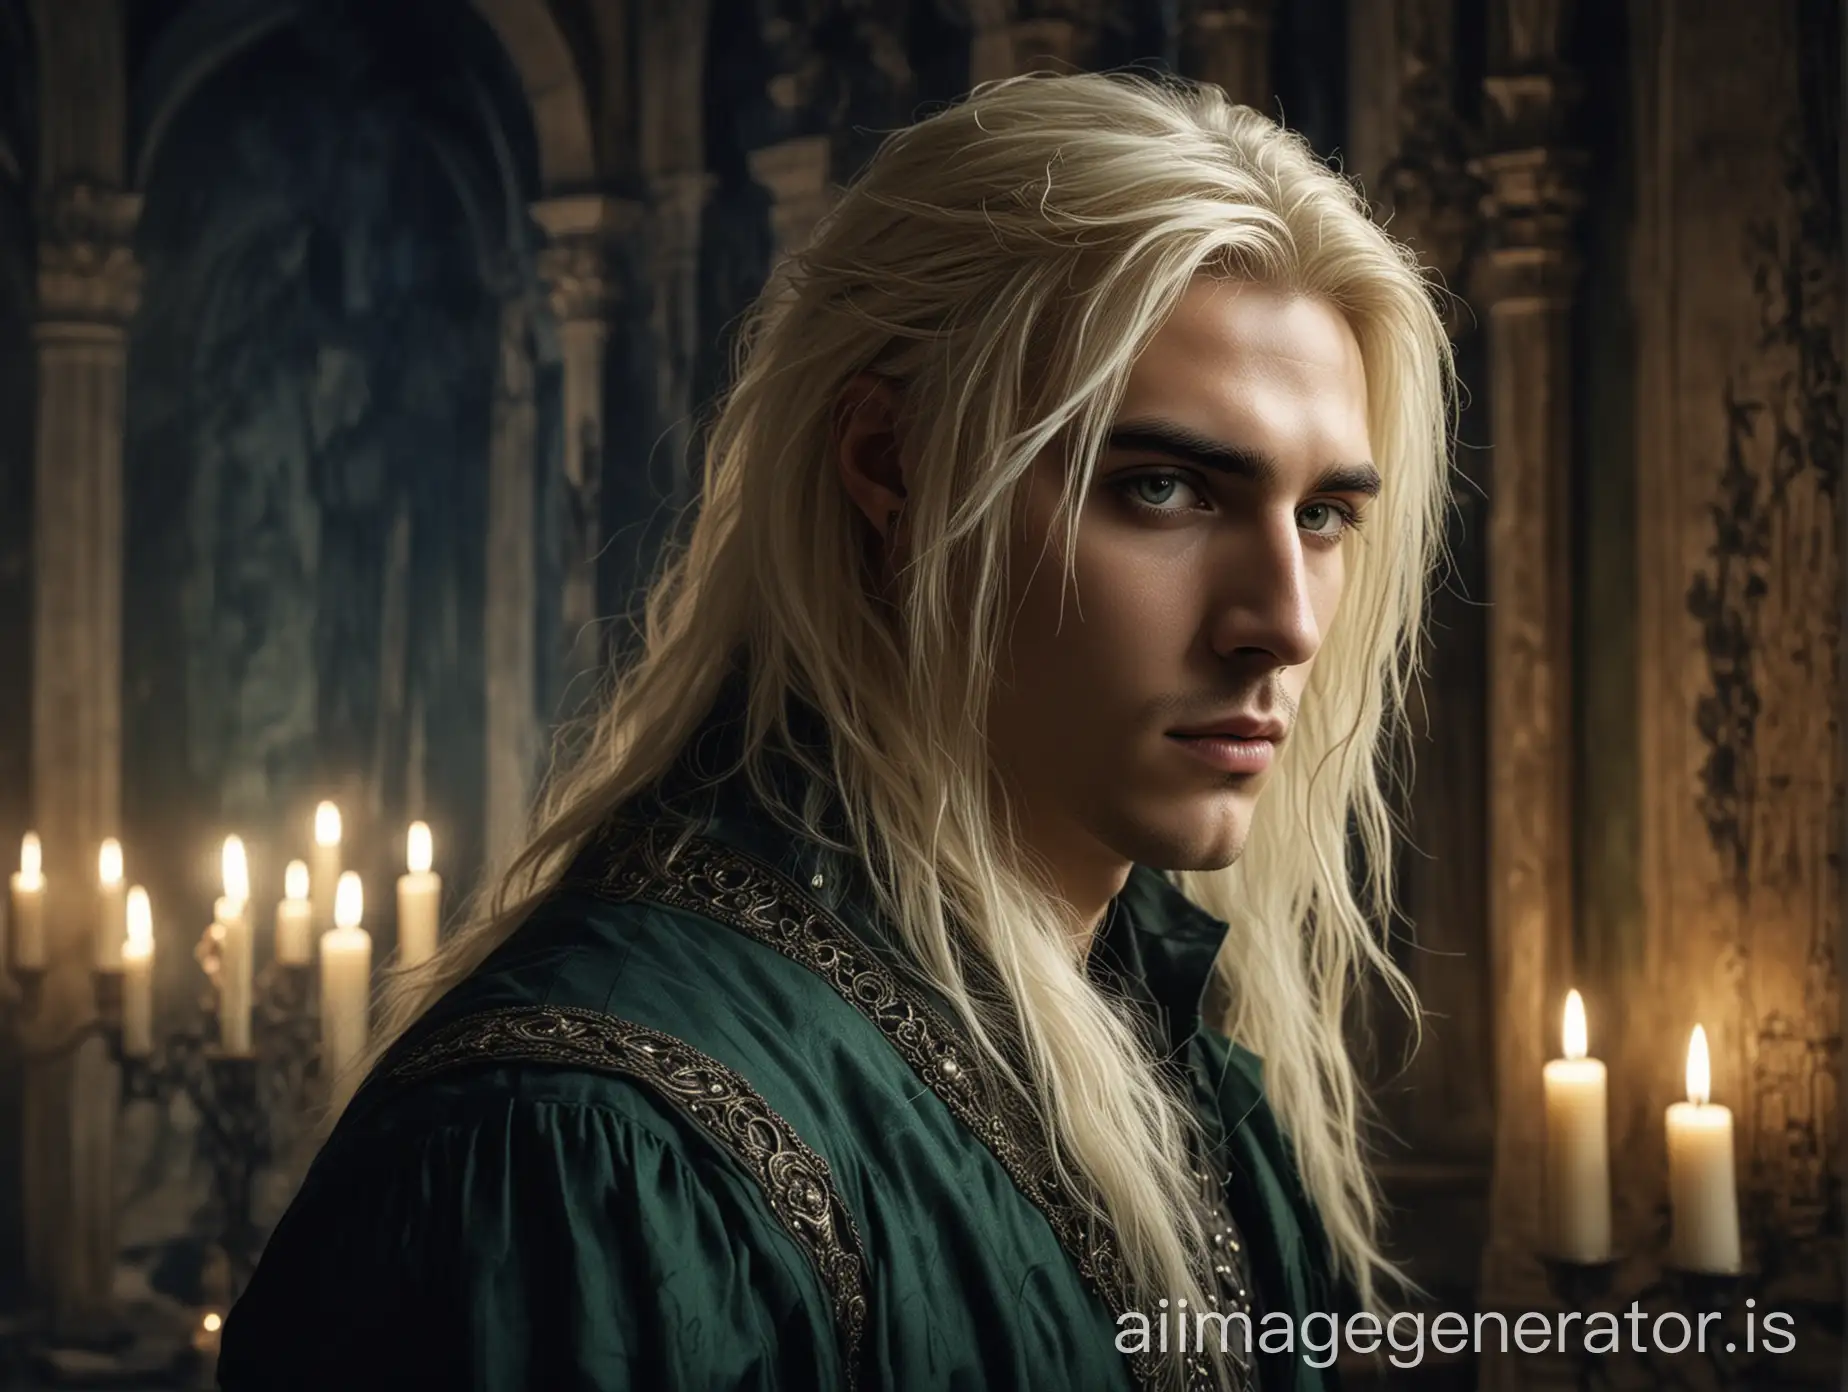 scar across his left eye, portrait, luis royo style, handsome young man with a long face long full platinum blonde sleek hair, big scar across left eye, dressed in intricate dark green clothes, background is a cluttered castle room royal room lit by candles, midnight blue backlight